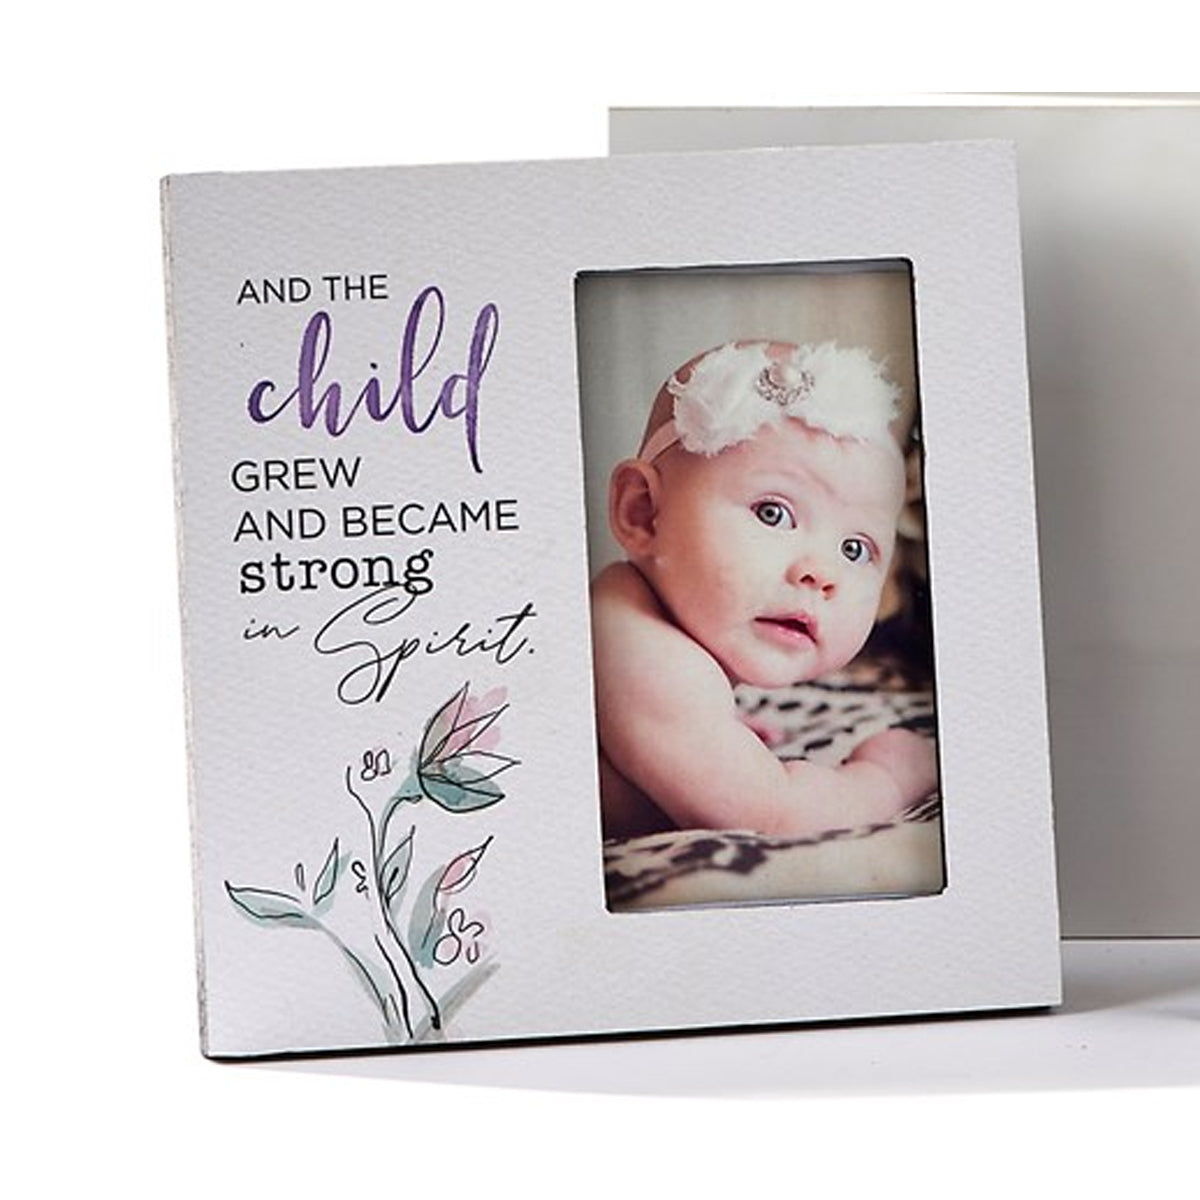 MDF Photo Frames, "And the child grew..."